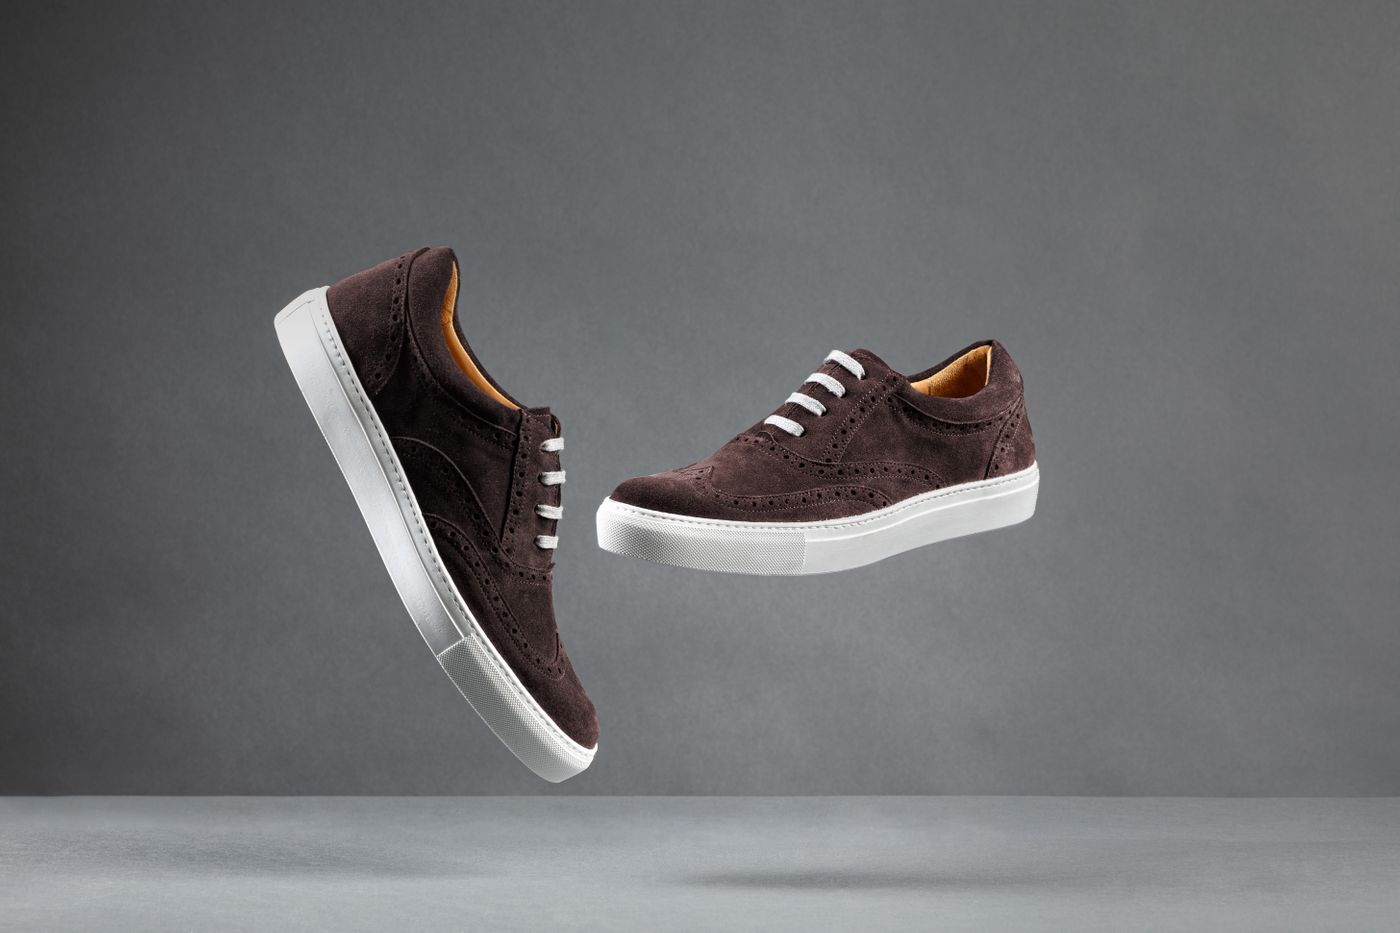 Business casual suede sneakers